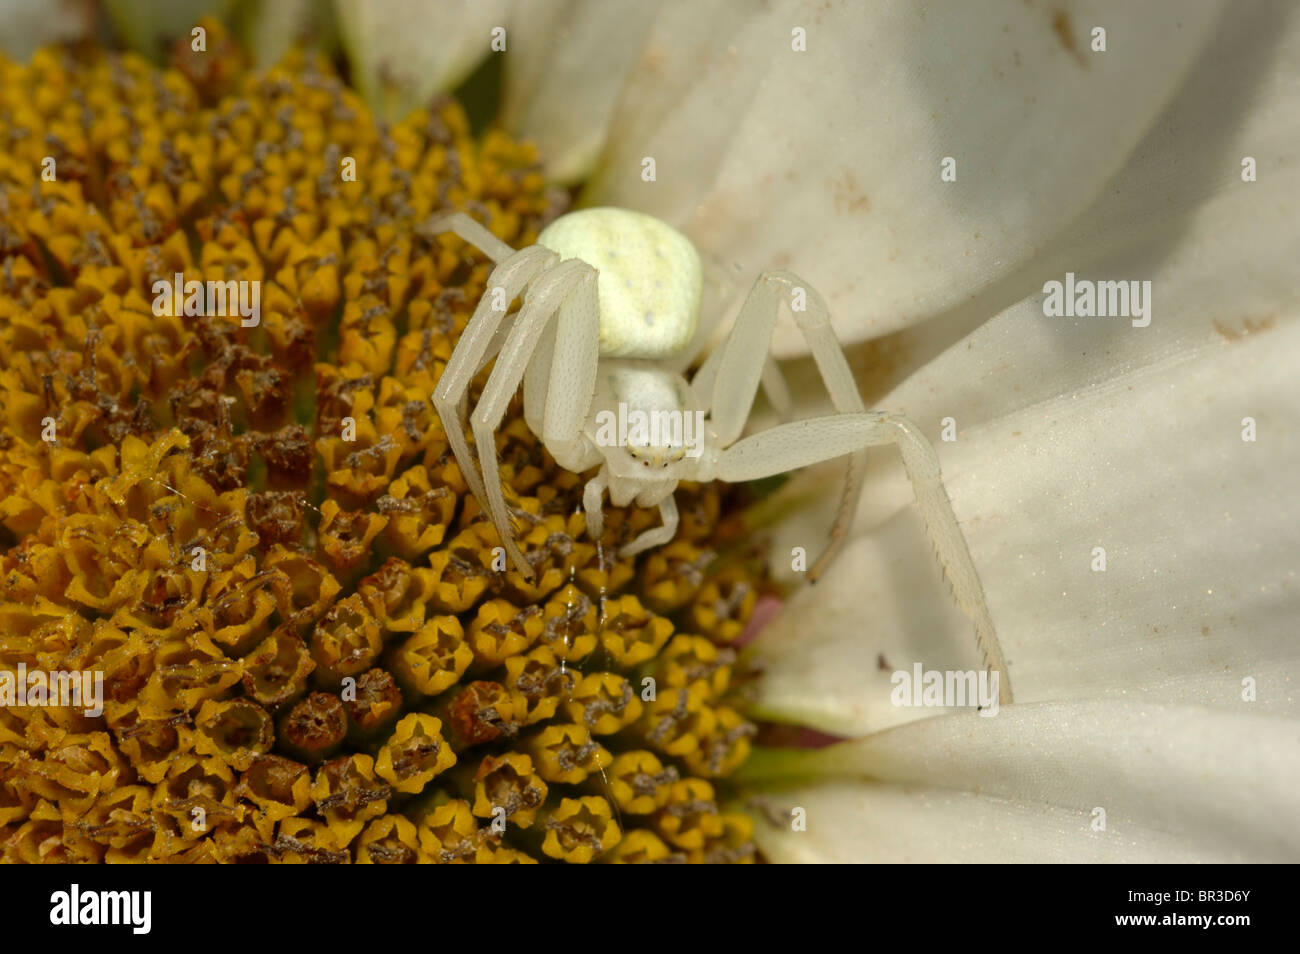 Goldenrod Crab Spider (Misumena vatia) a pale coloura variation of this crab spider on a shasta daisy flower Stock Photo